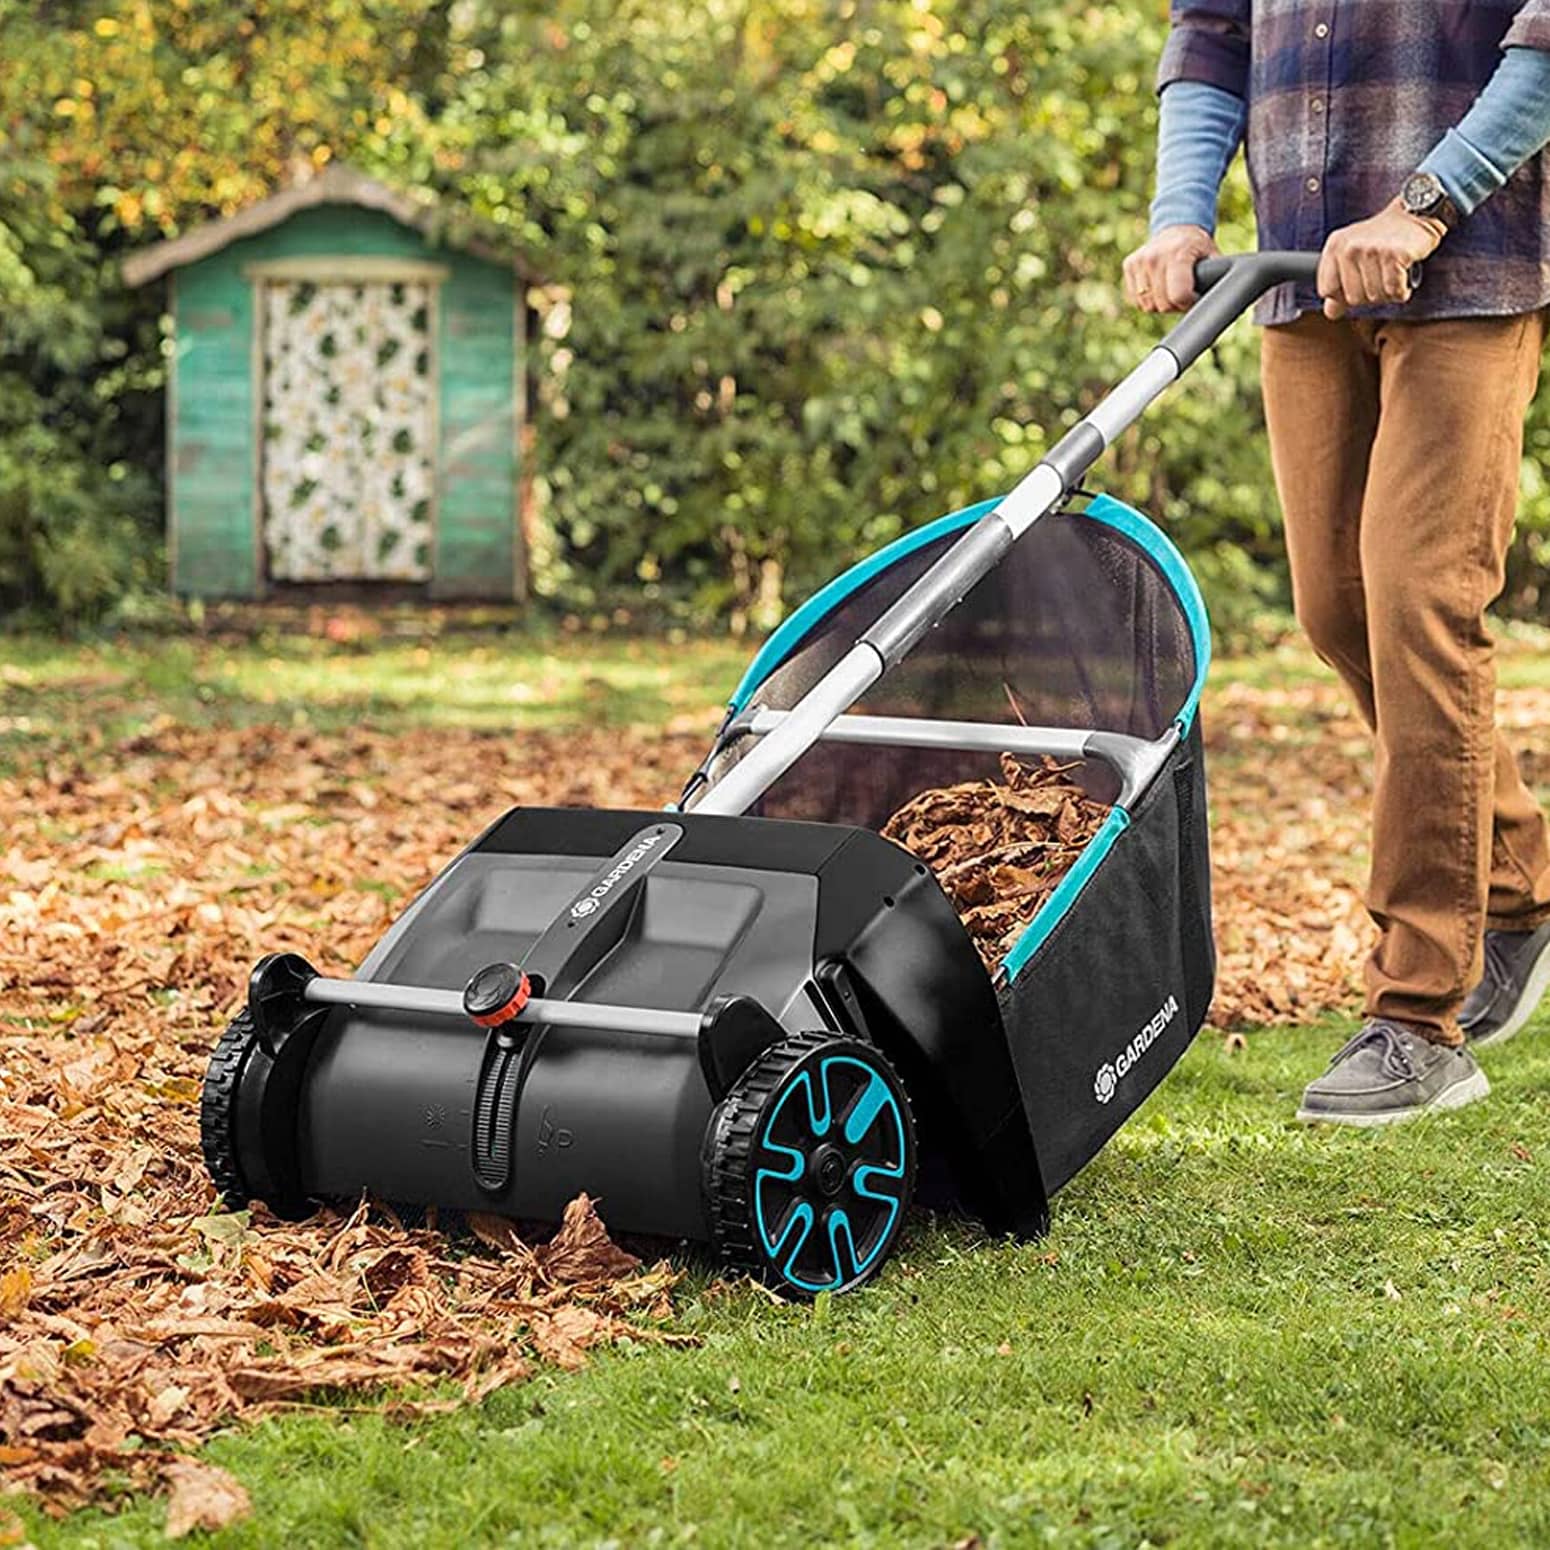 Gardena Leaf Collecting Lawn Sweeper